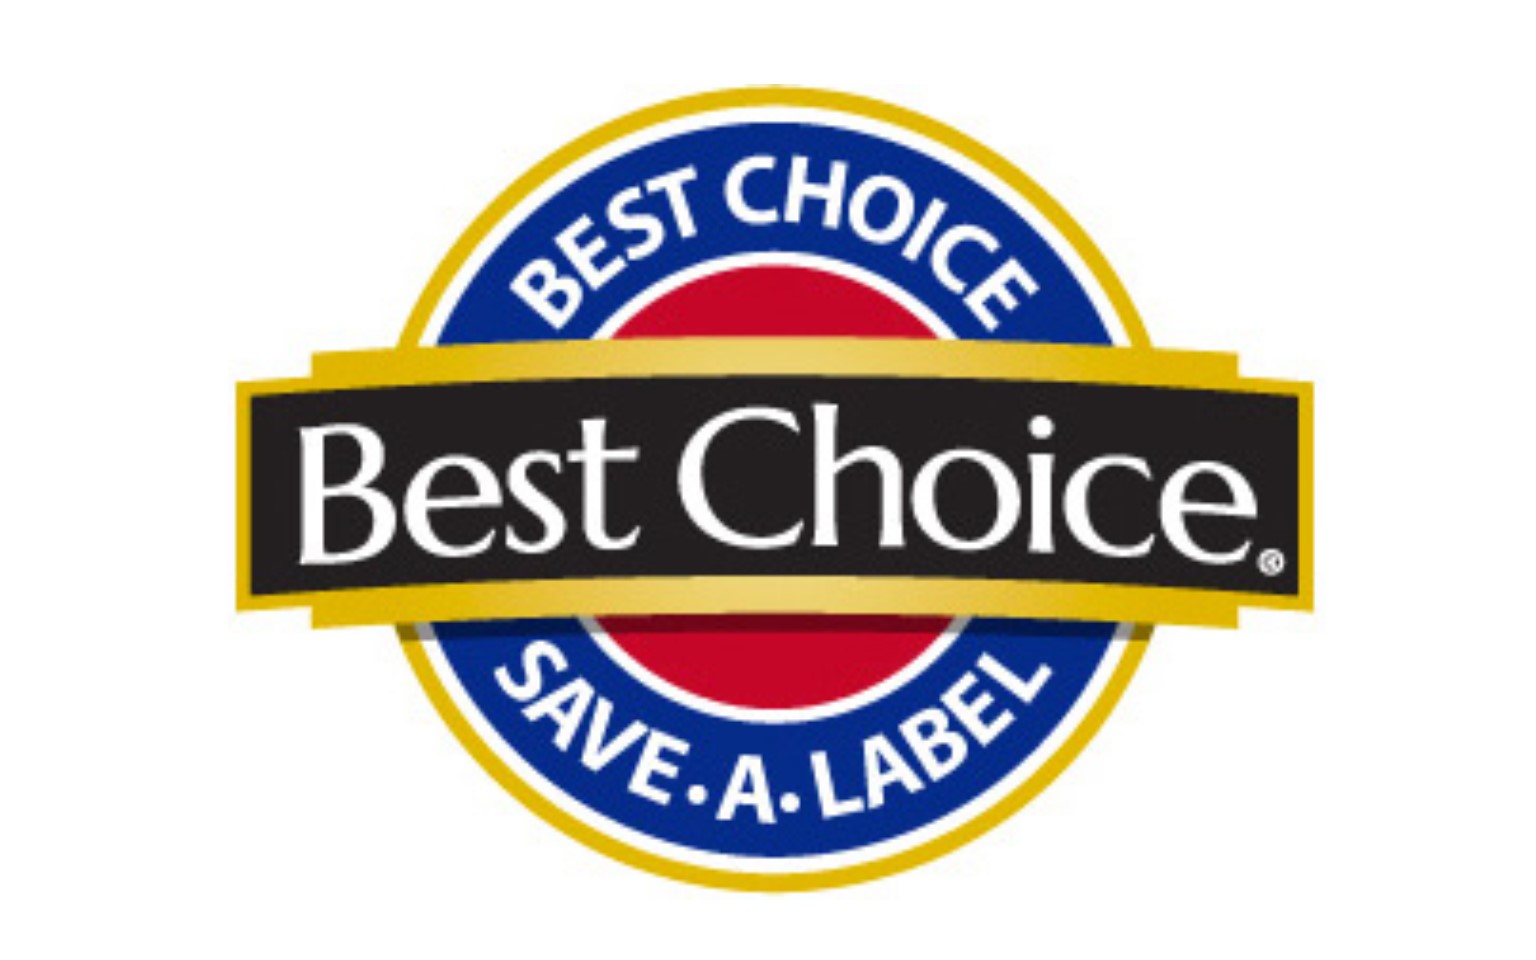 Well choice. Значок best choice. Best choice products. Чоис. Best choice одежда.